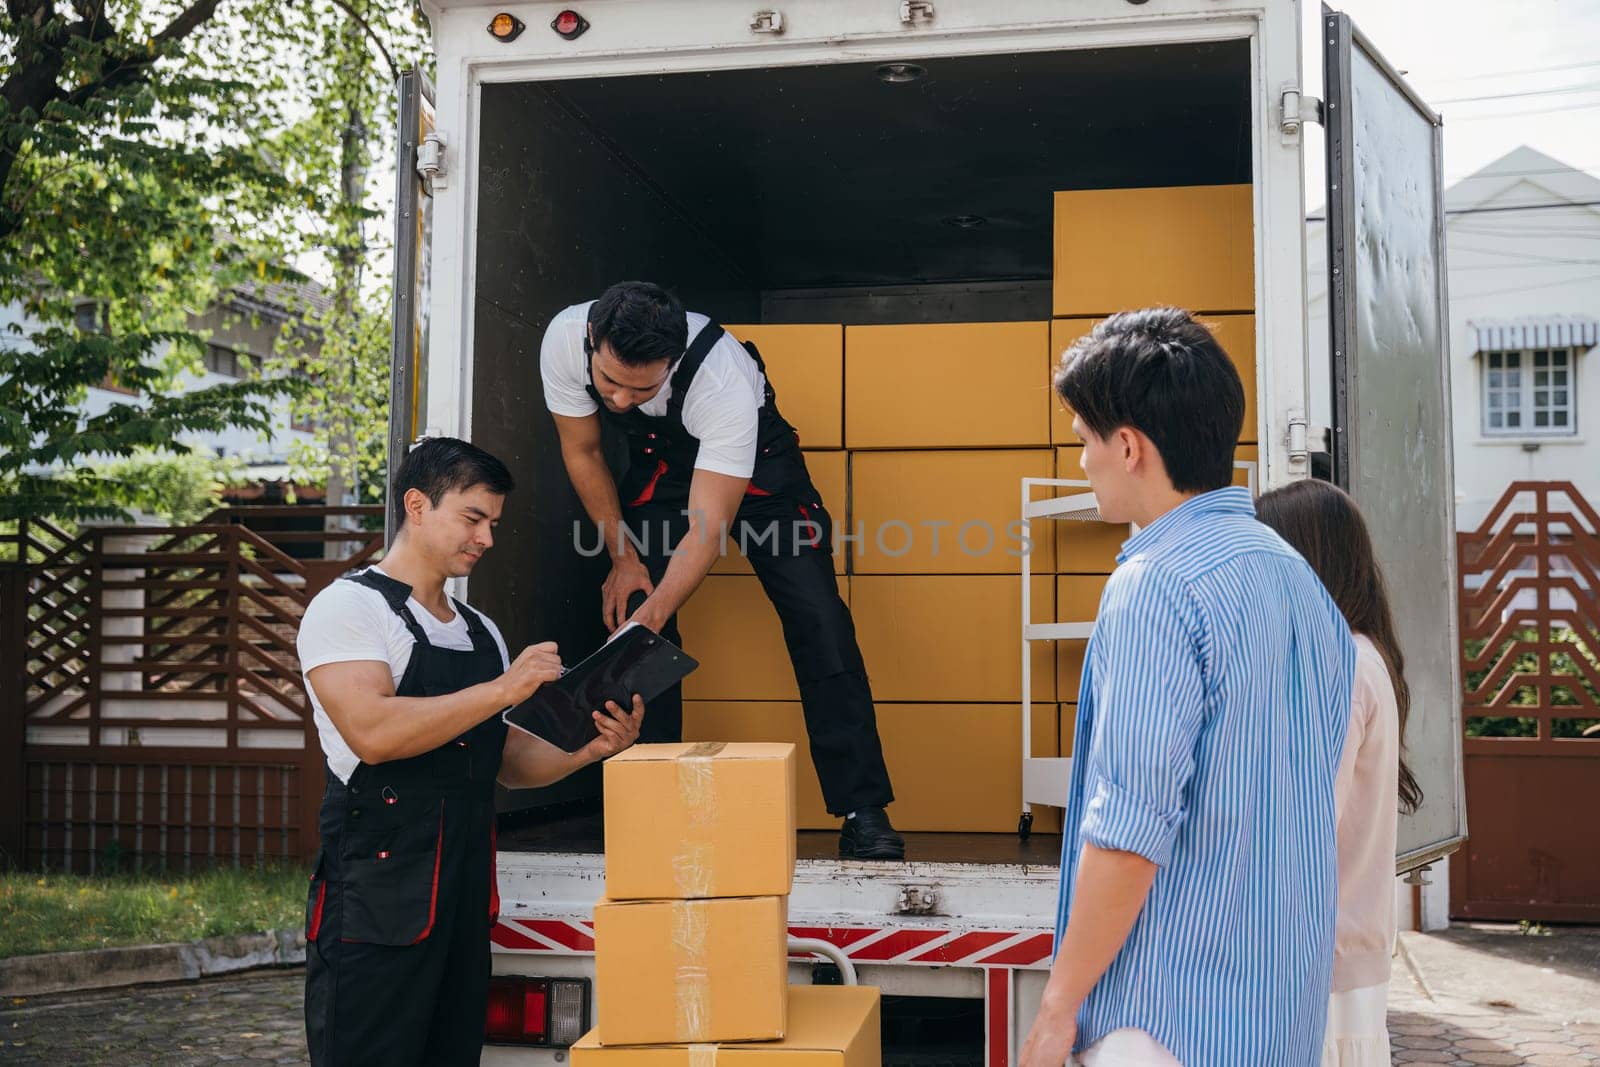 A couple signs delivery checklist after furniture upload delighted by professional movers' service. Employees display teamwork for customer satisfaction. Moving Day Concept by Sorapop